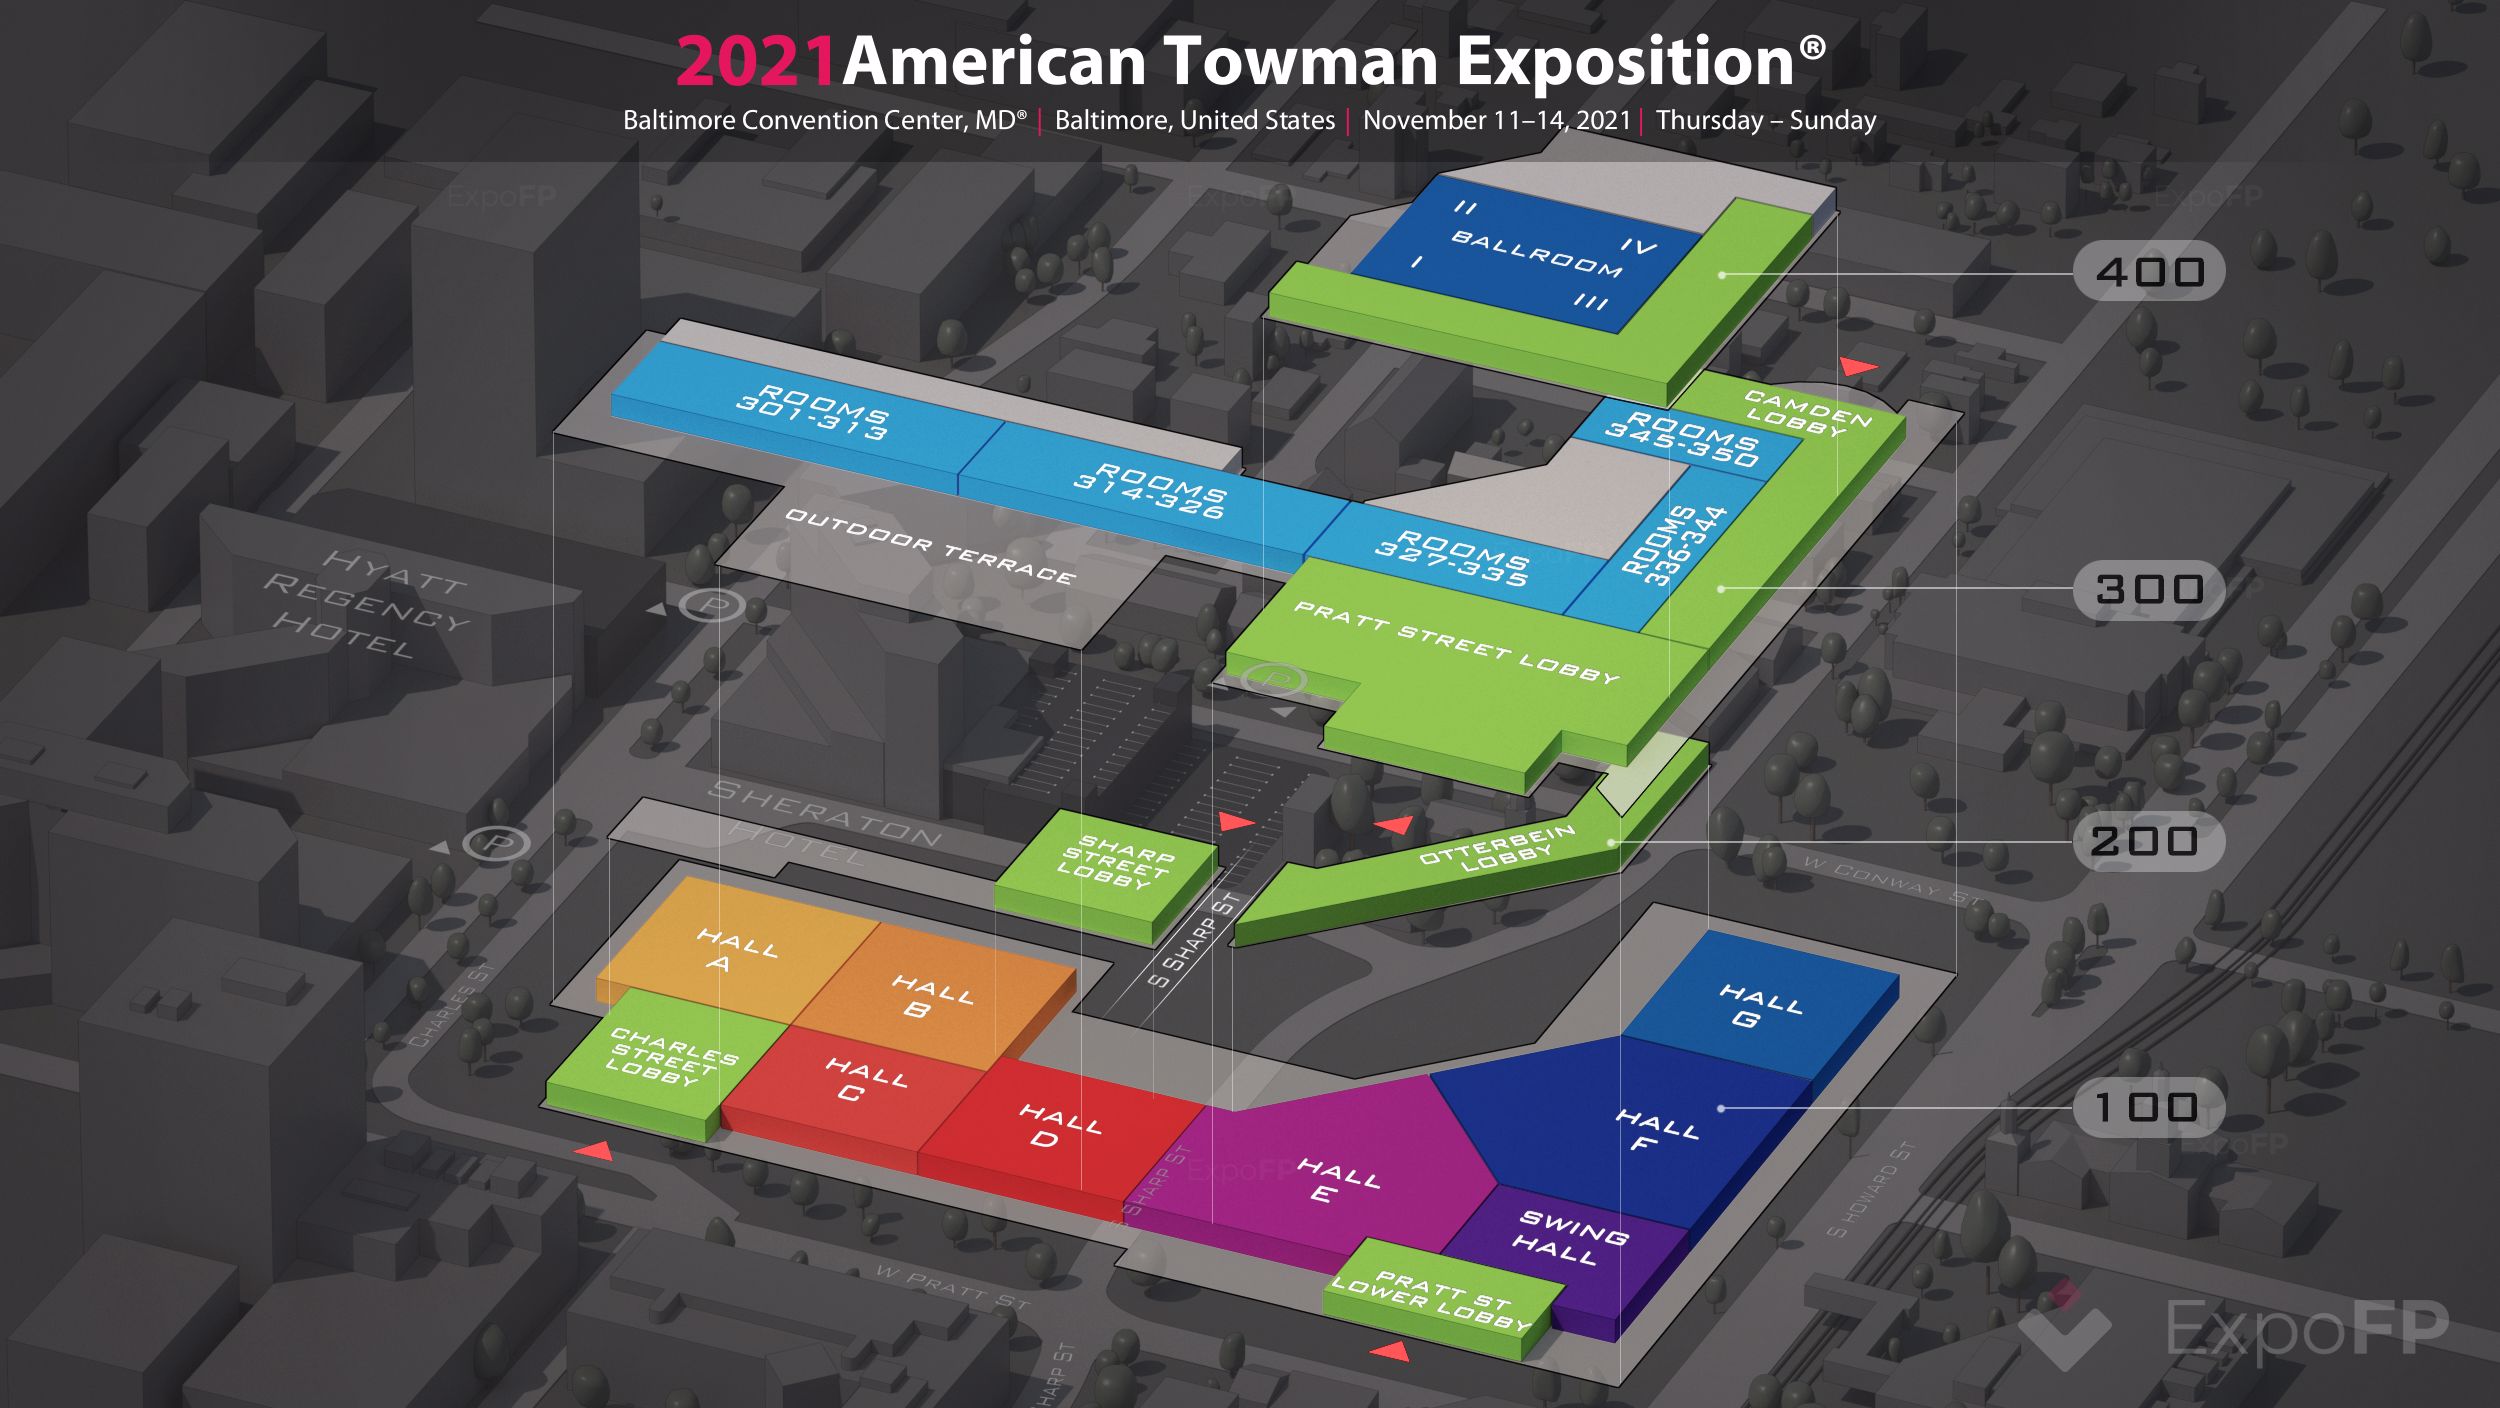 American Towman Exposition 2021 in Baltimore Convention